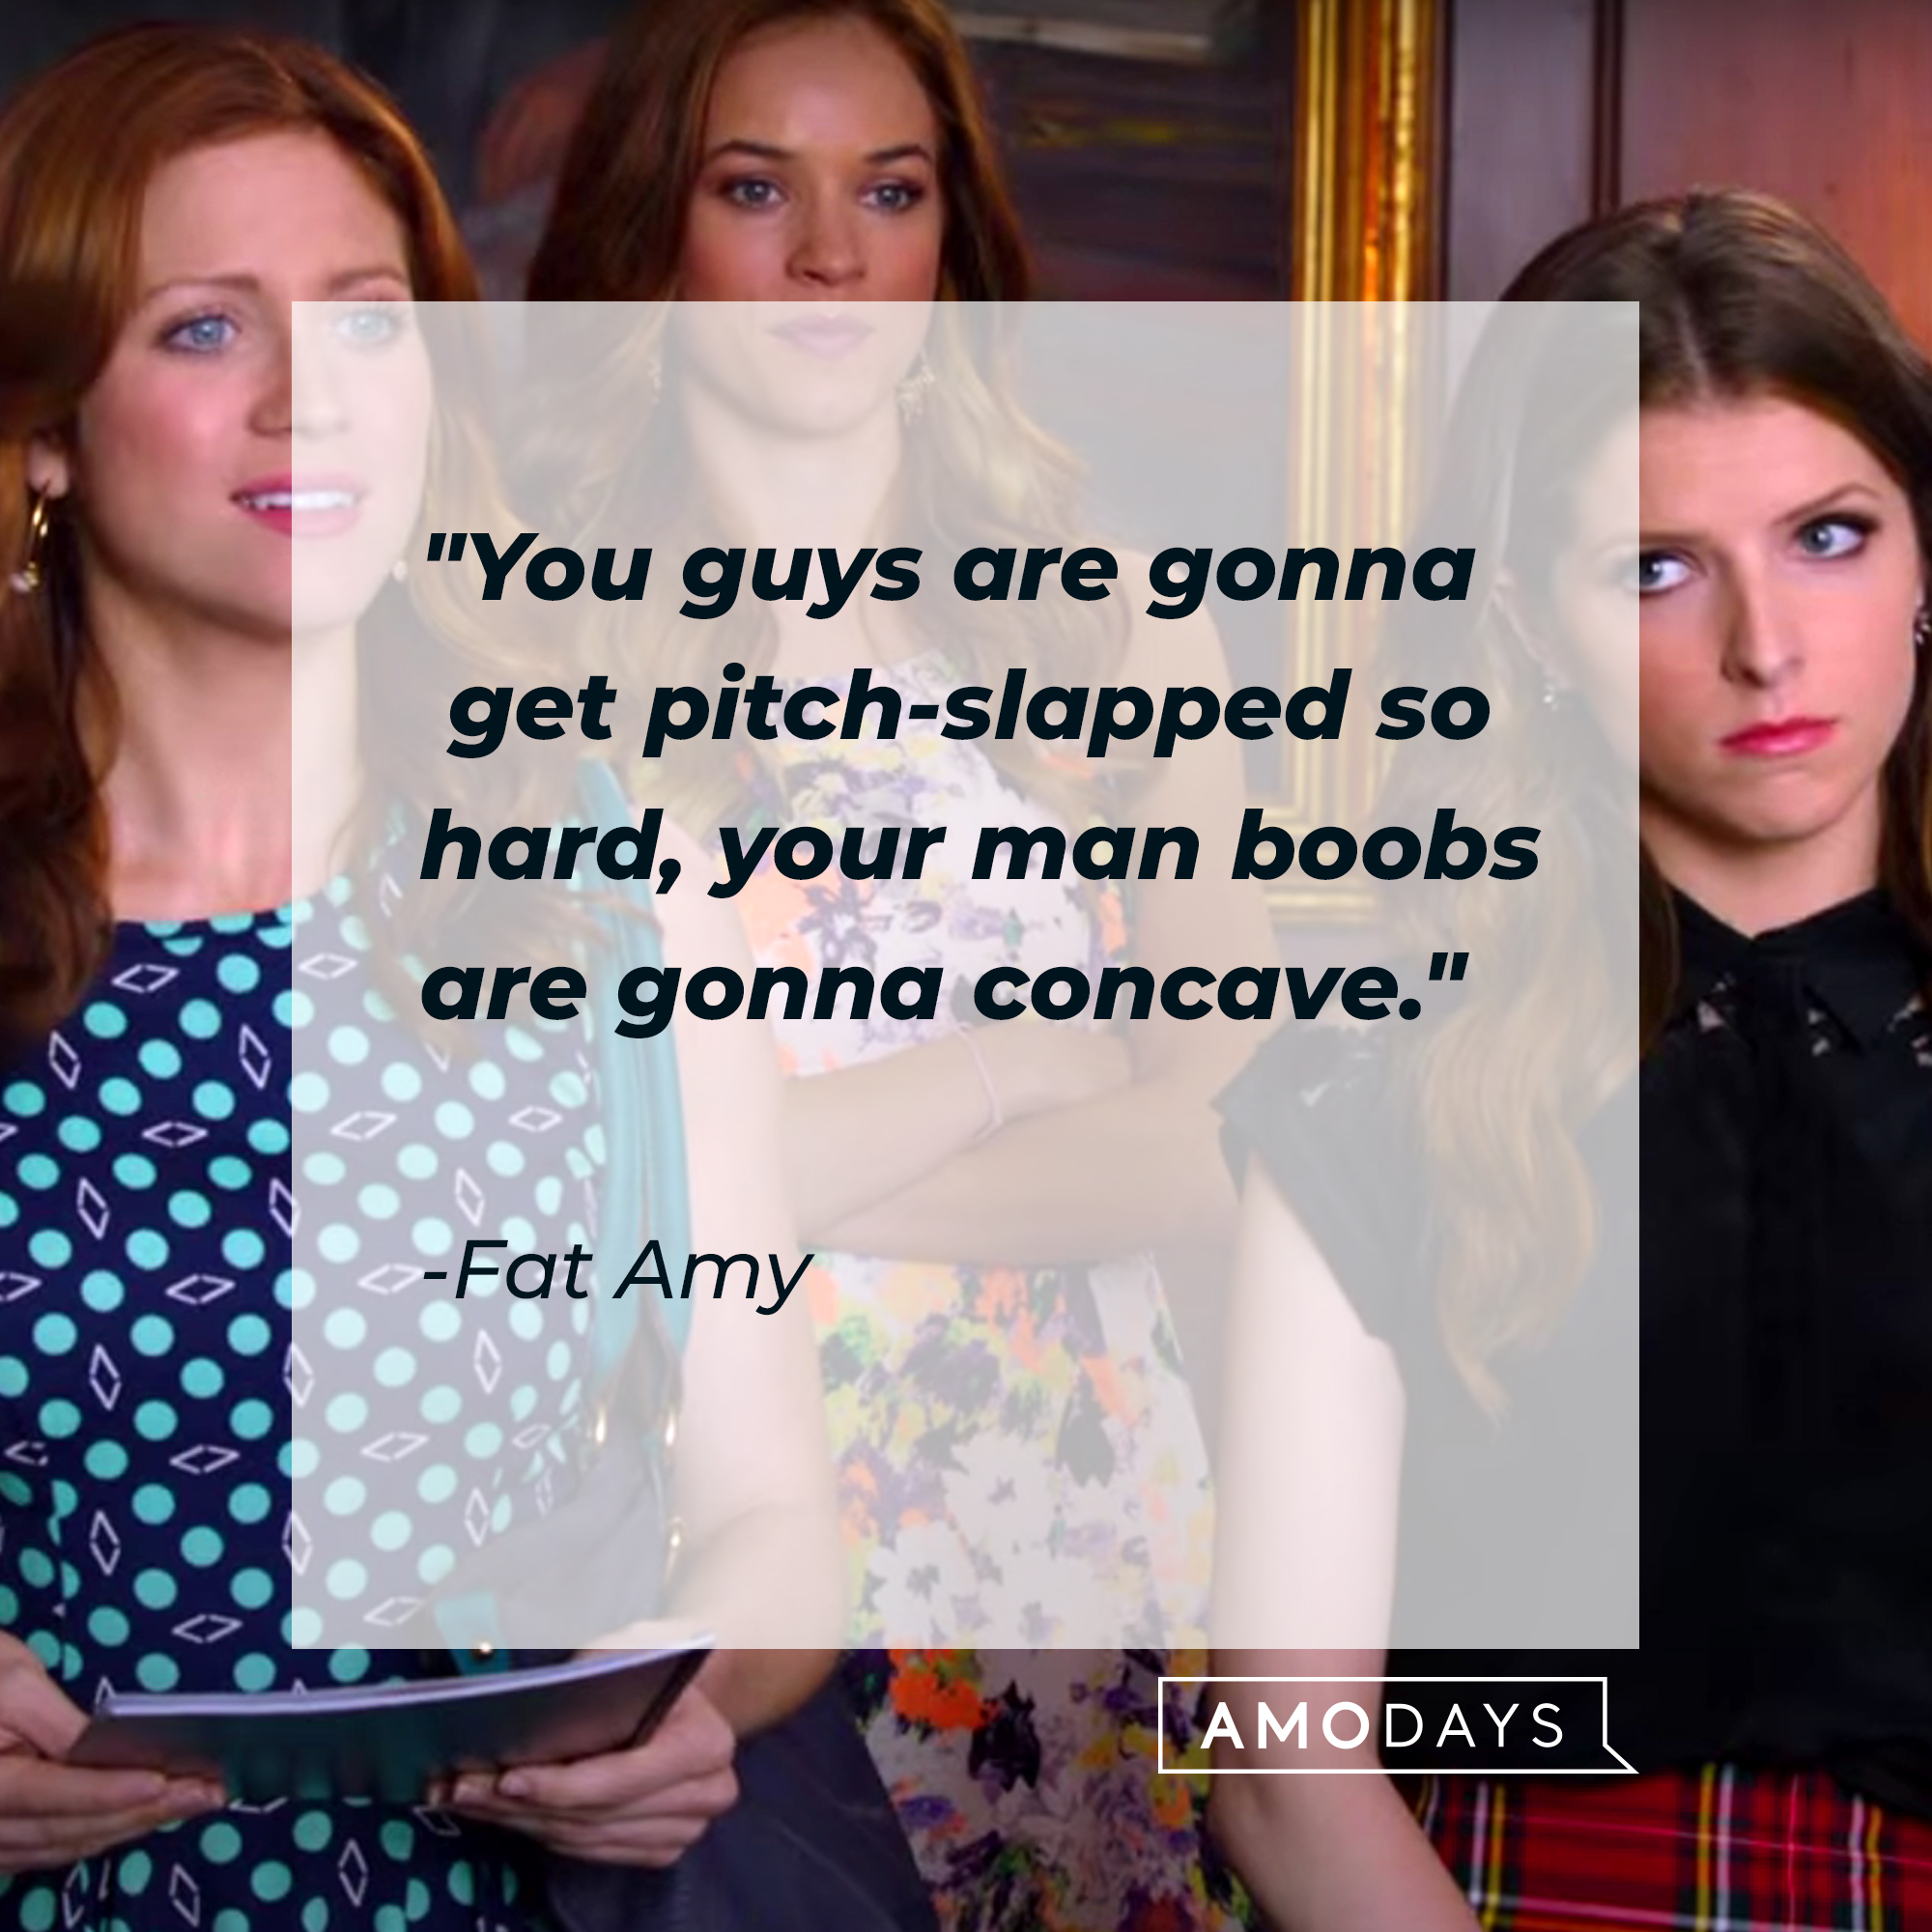 The Fat Amy quote, "You guys are gonna get pitch-slapped so hard, your man boobs are gonna concave." | Source: youtube.com/PitchPerfect